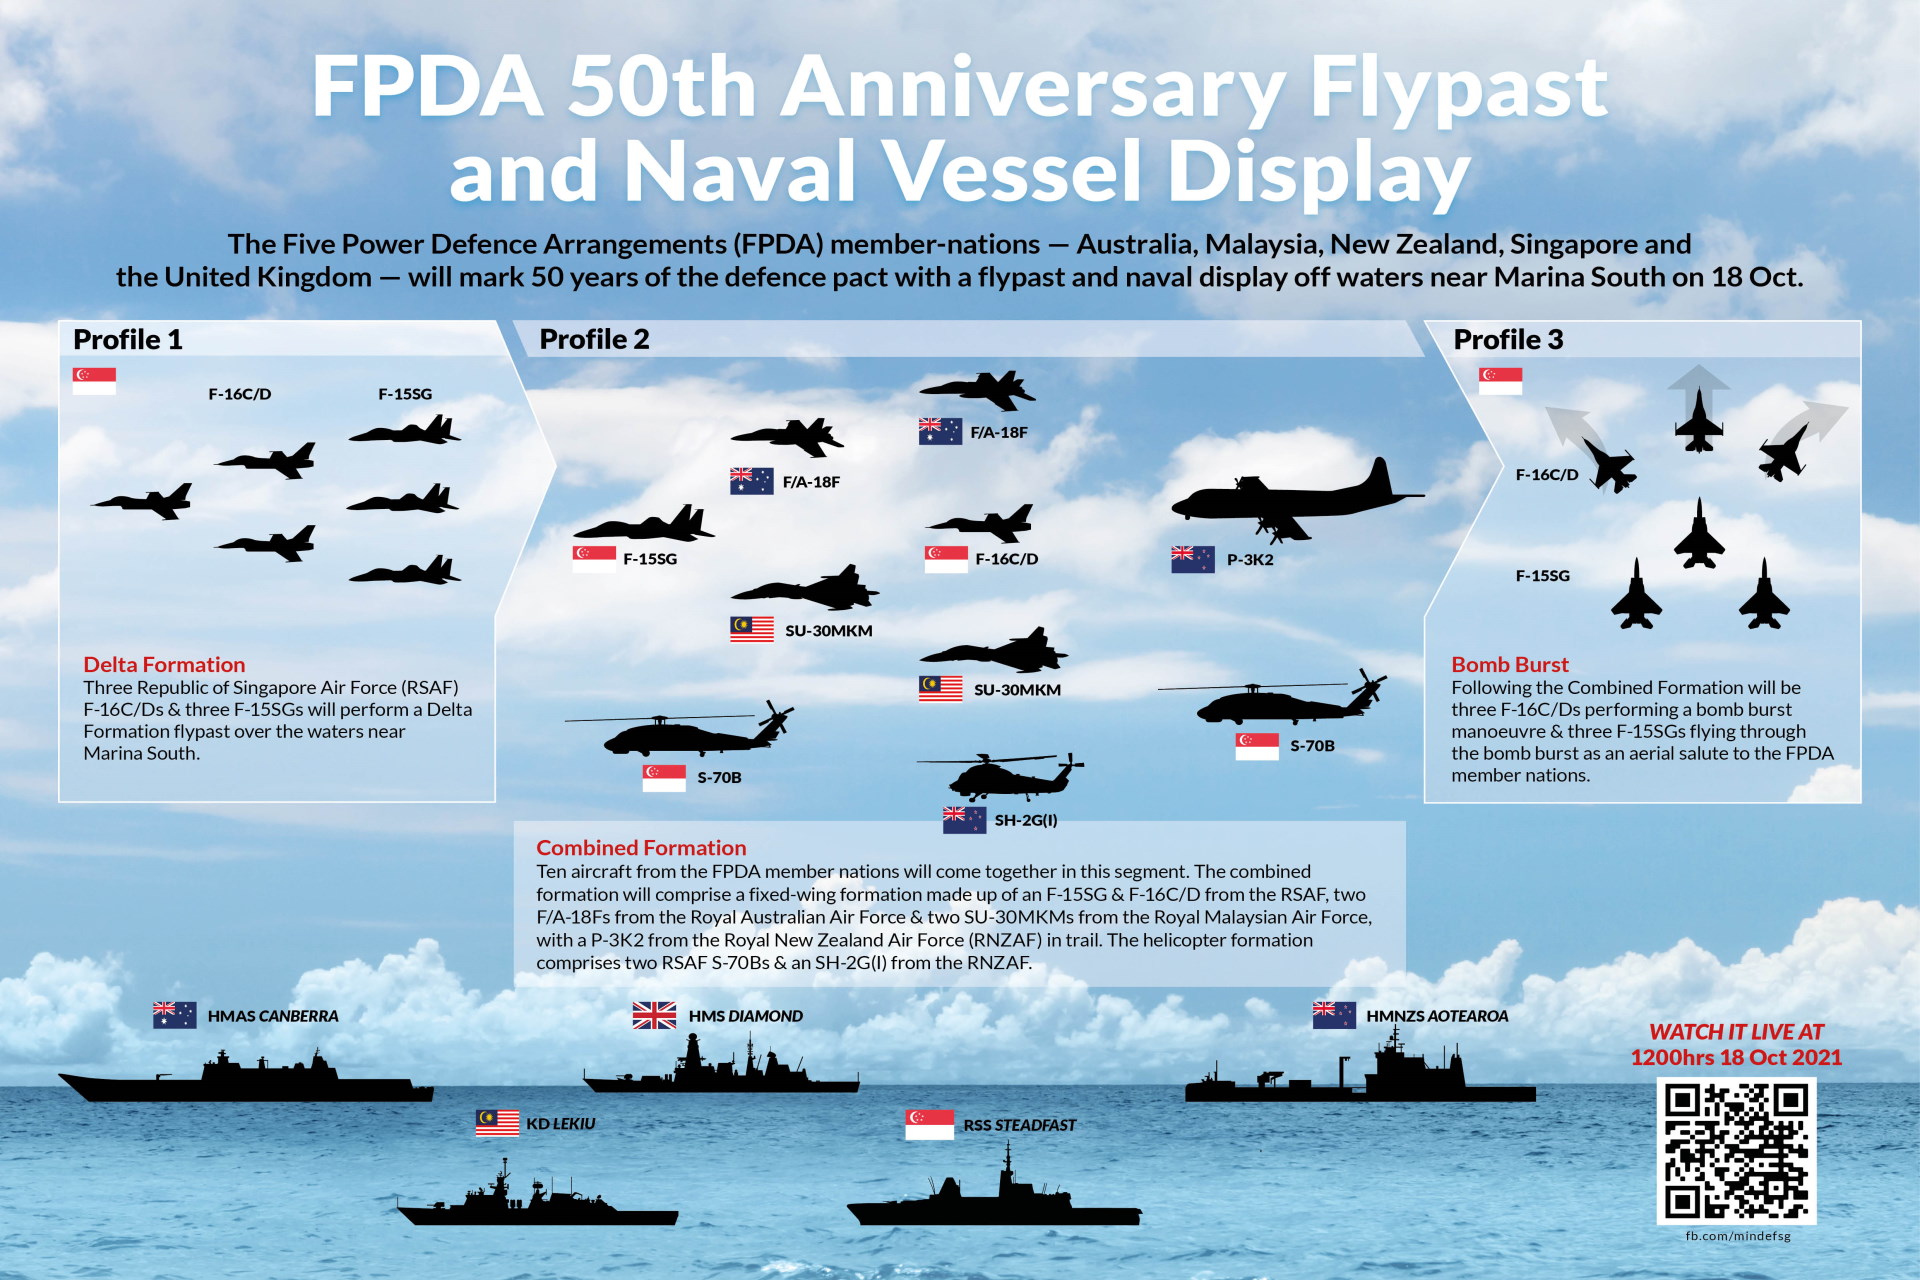 FPDA_Member_Nations_to_Commemorate_50th_Anniversary_with_Flypast_and_Naval_Vessel_Display